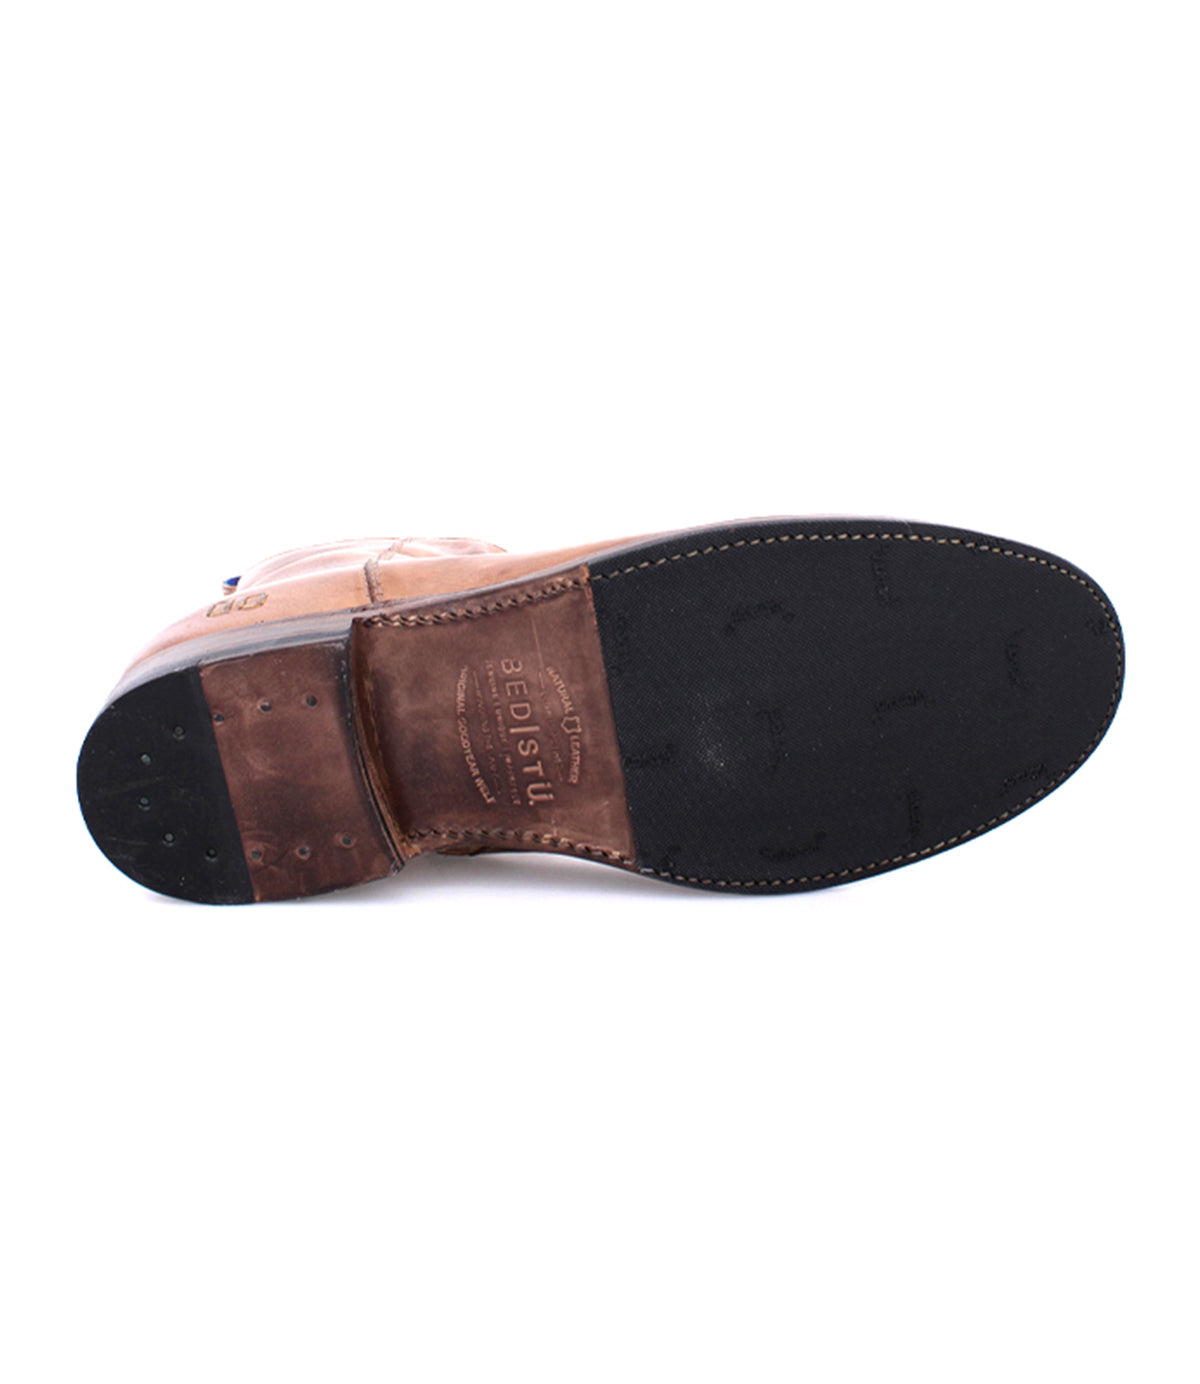 Bottom view of a Bed Stu Kaldi brown leather ankle boot with a partially rubberized sole, isolated on a white background.